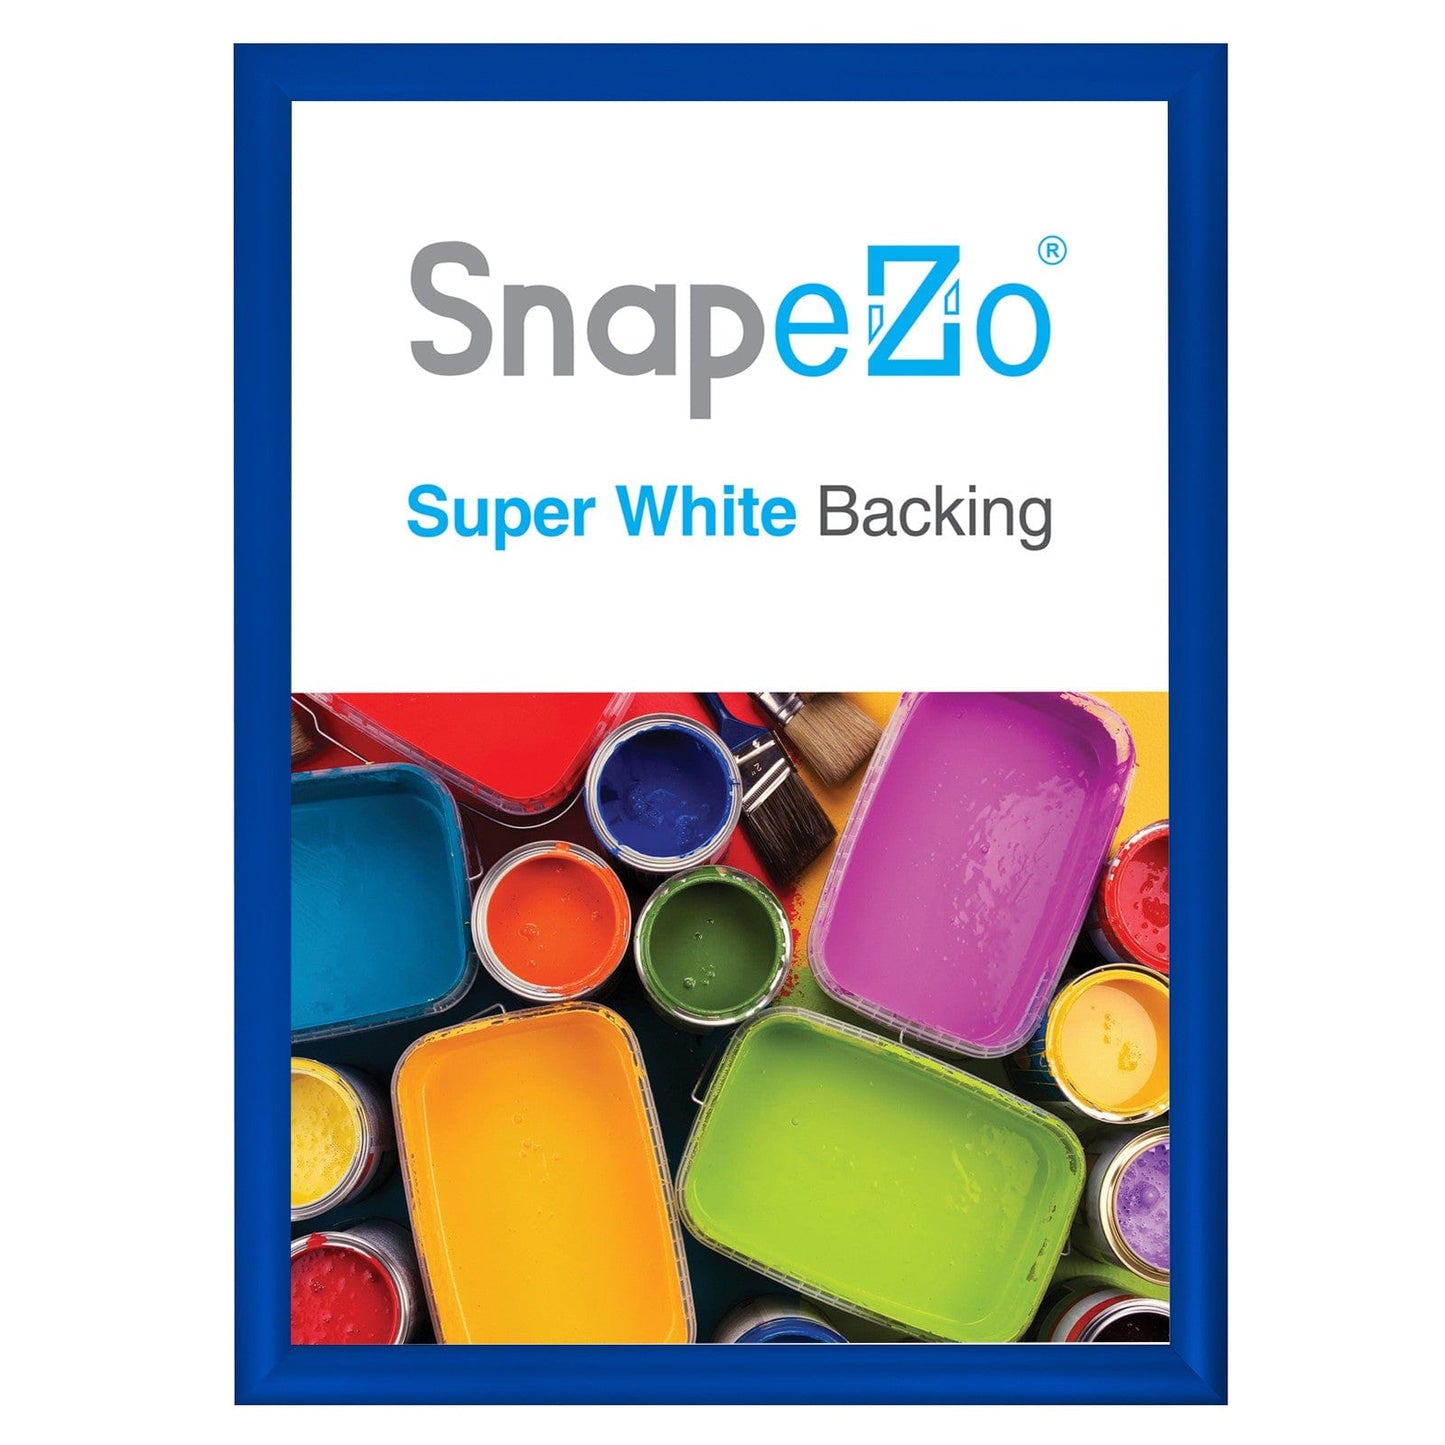 21x29 Blue SnapeZo® Snap Frame - 1.2" Profile - Snap Frames Direct